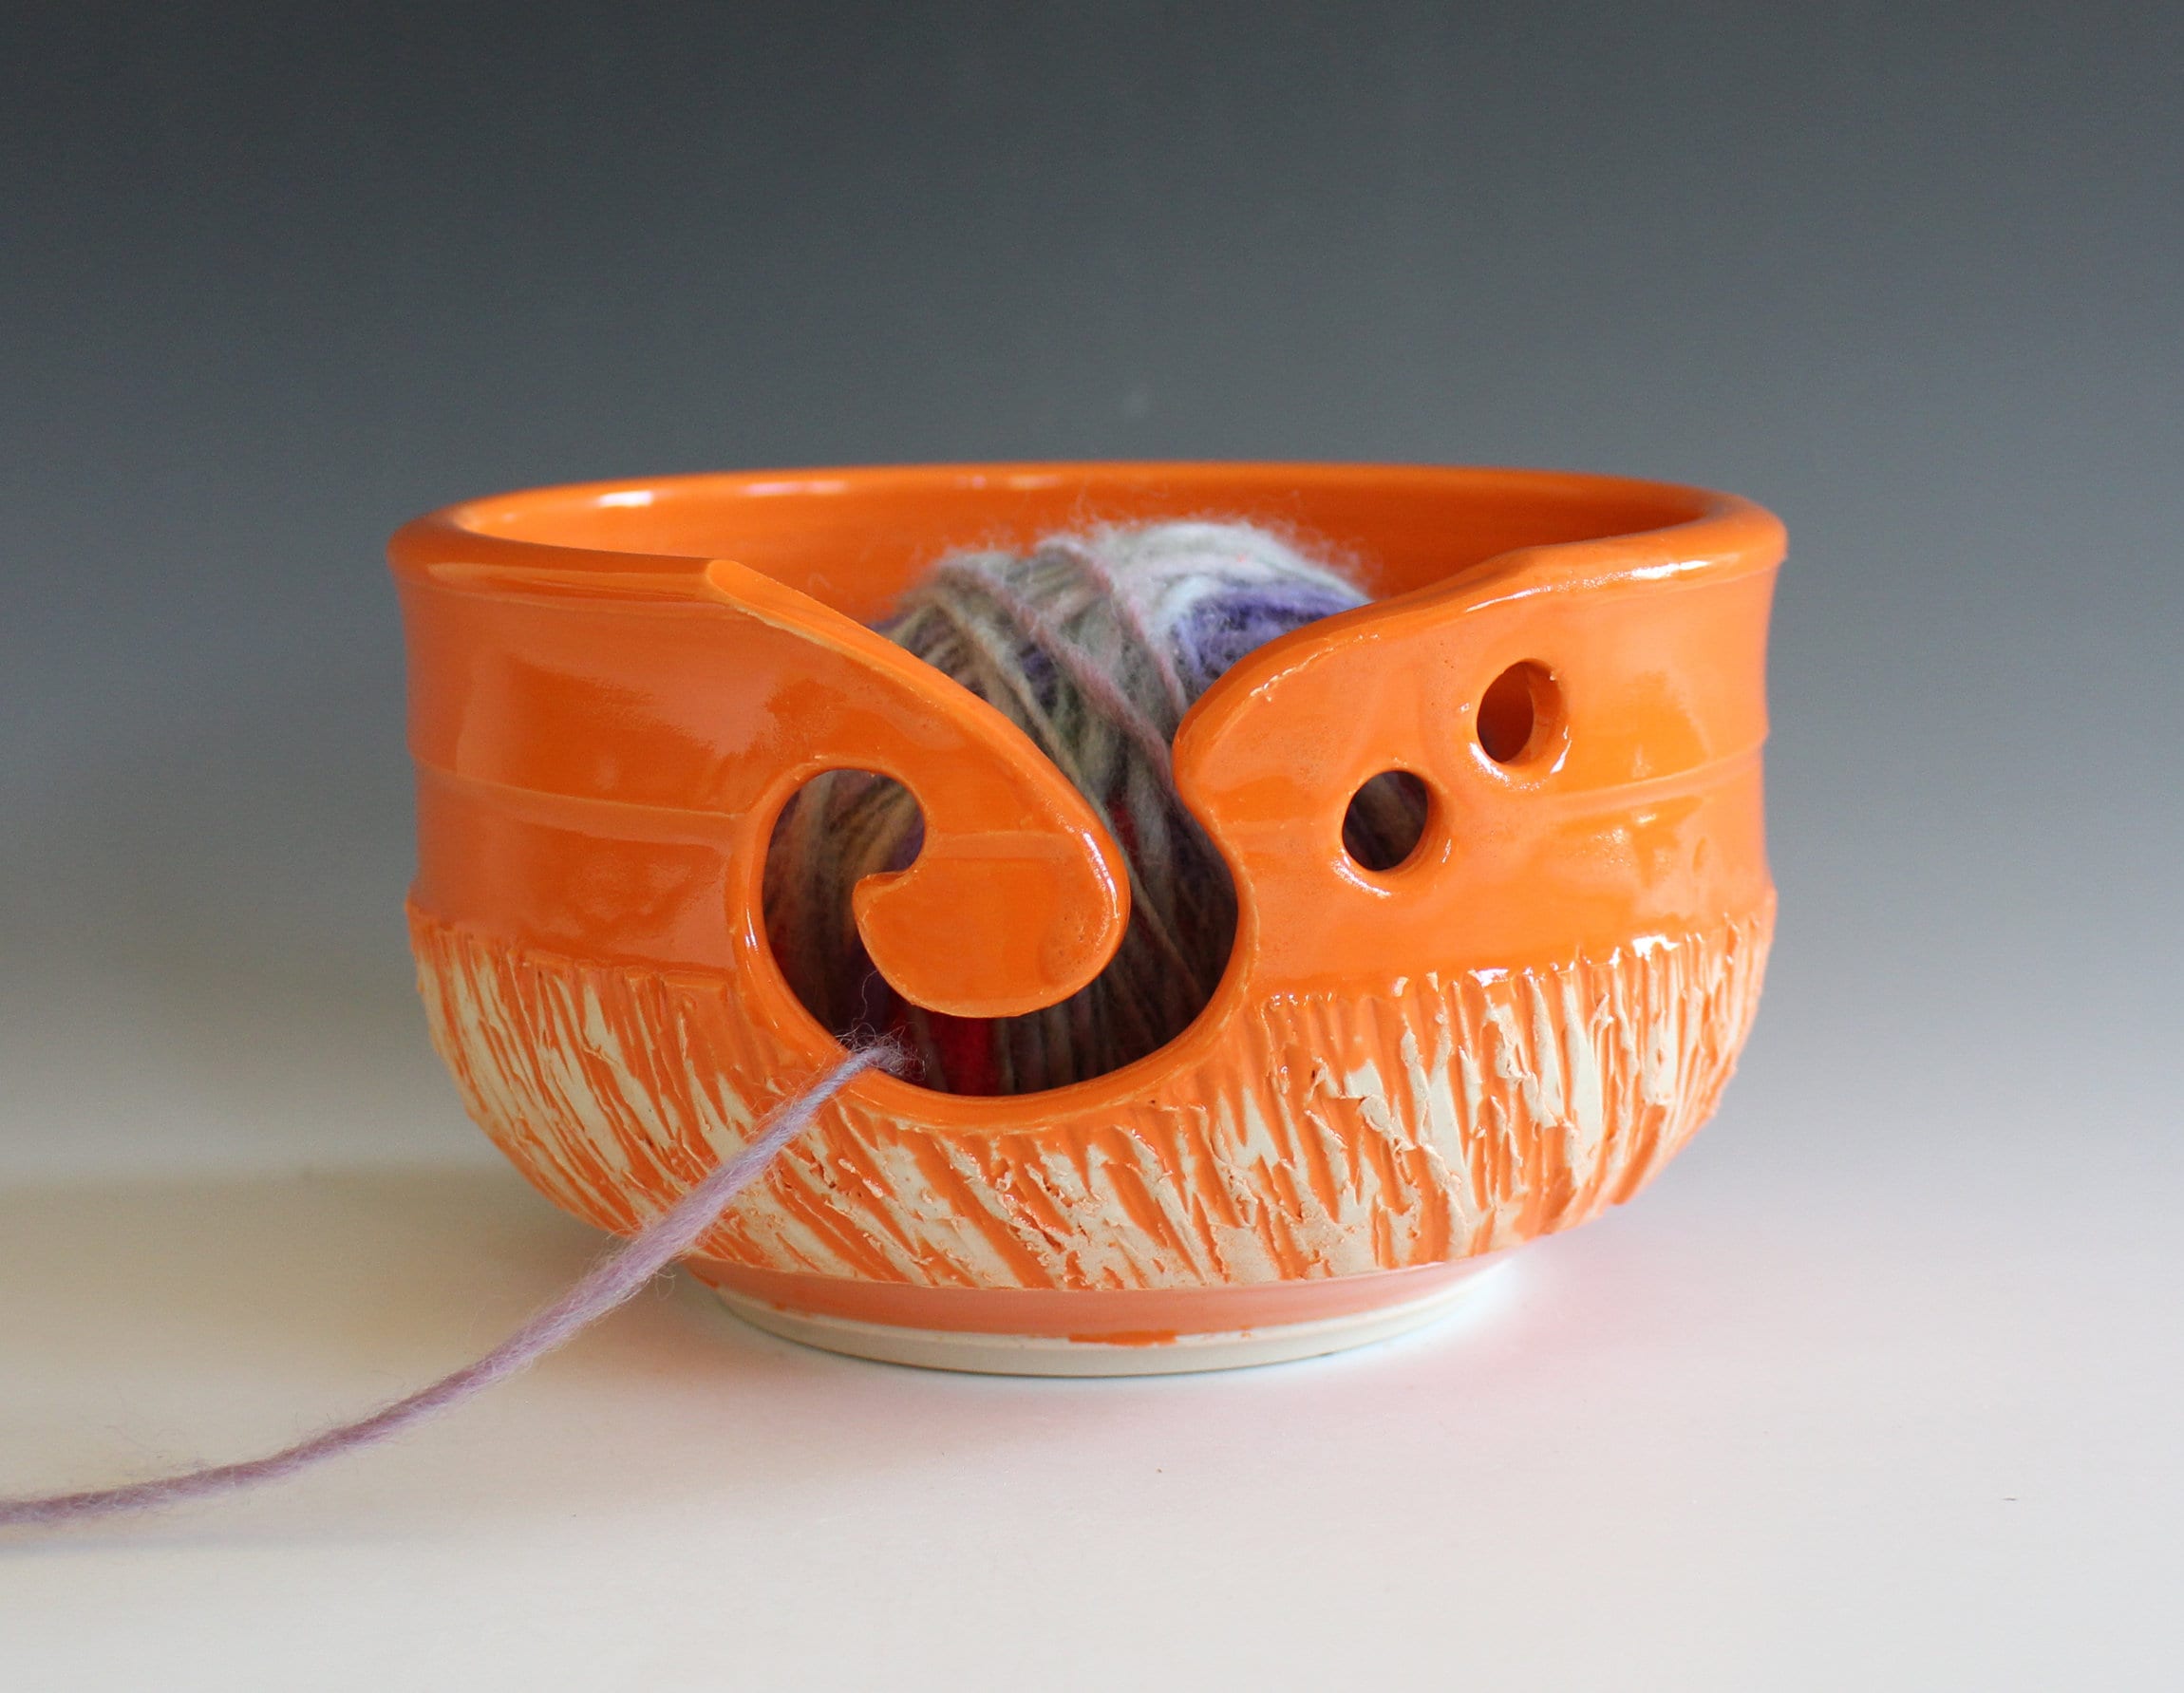 Large Handcrafted Yarn Bowl Wood Sand Waves Yarn Bowl for Knitting and Crocheting  Yarn Bowl Handmade 